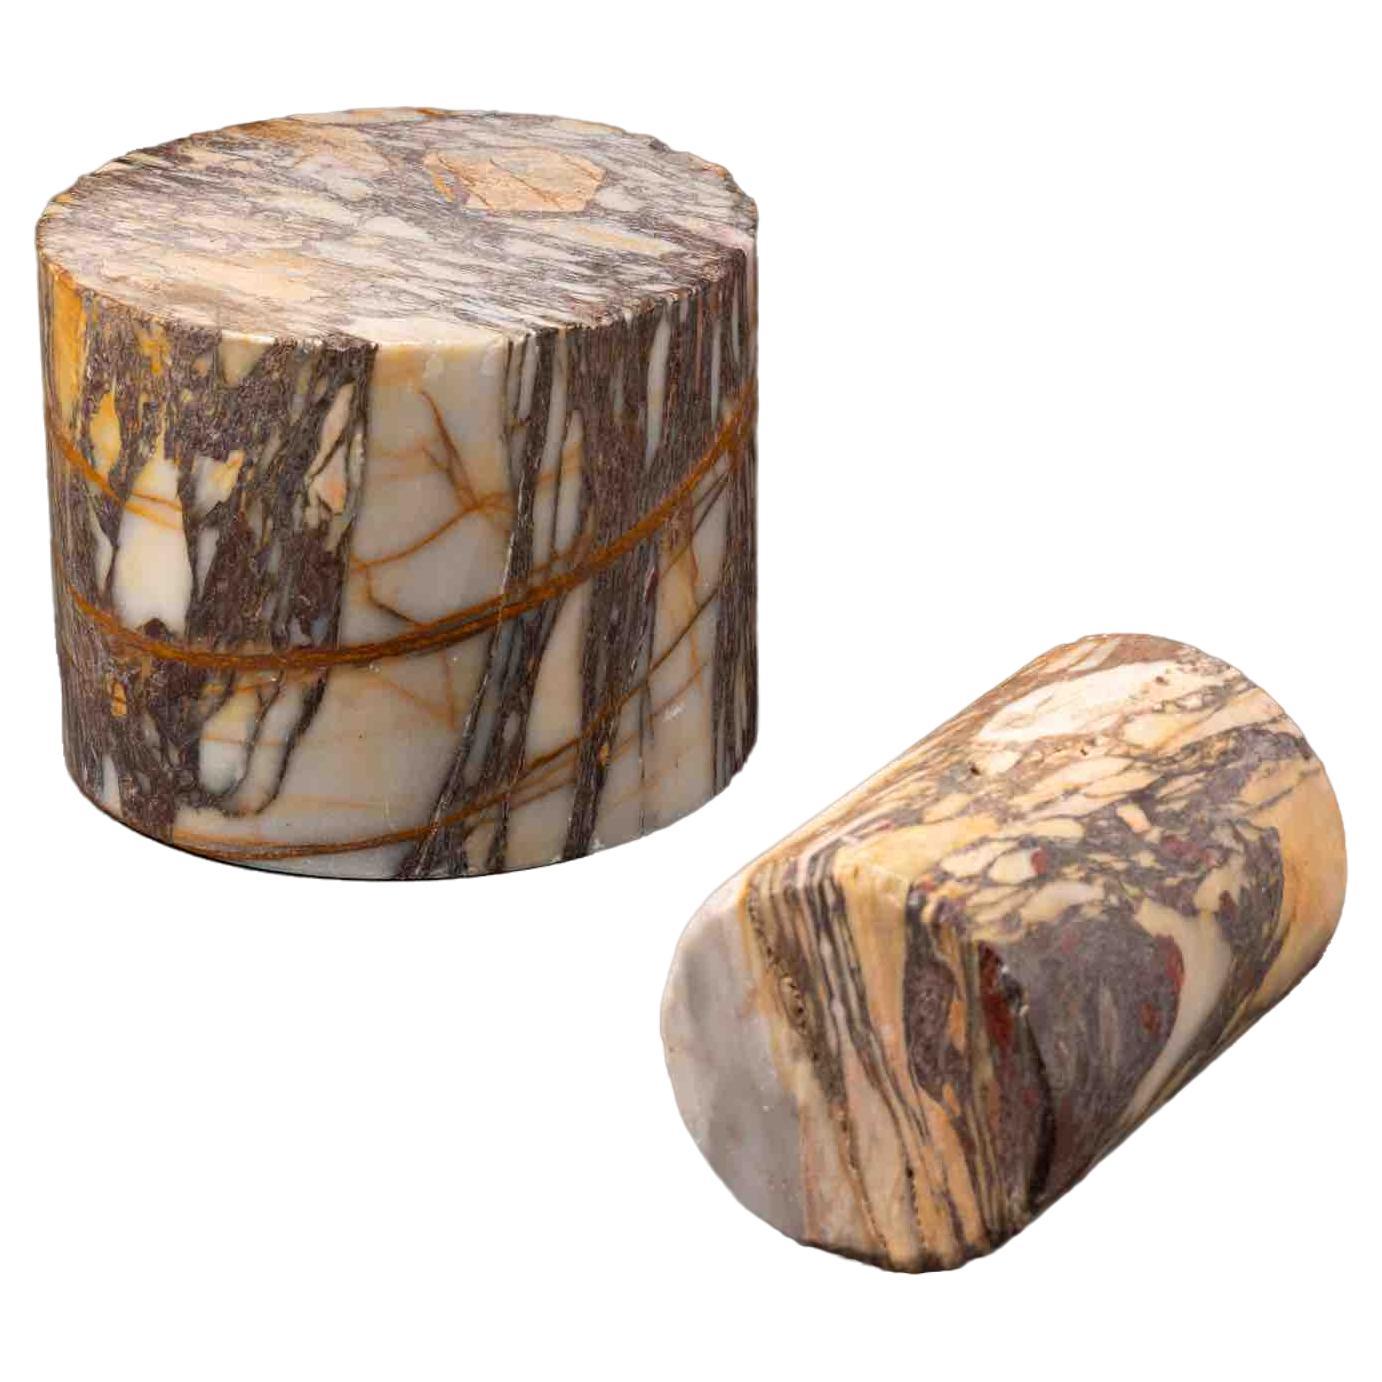 Two cylindrical colored marble specimens